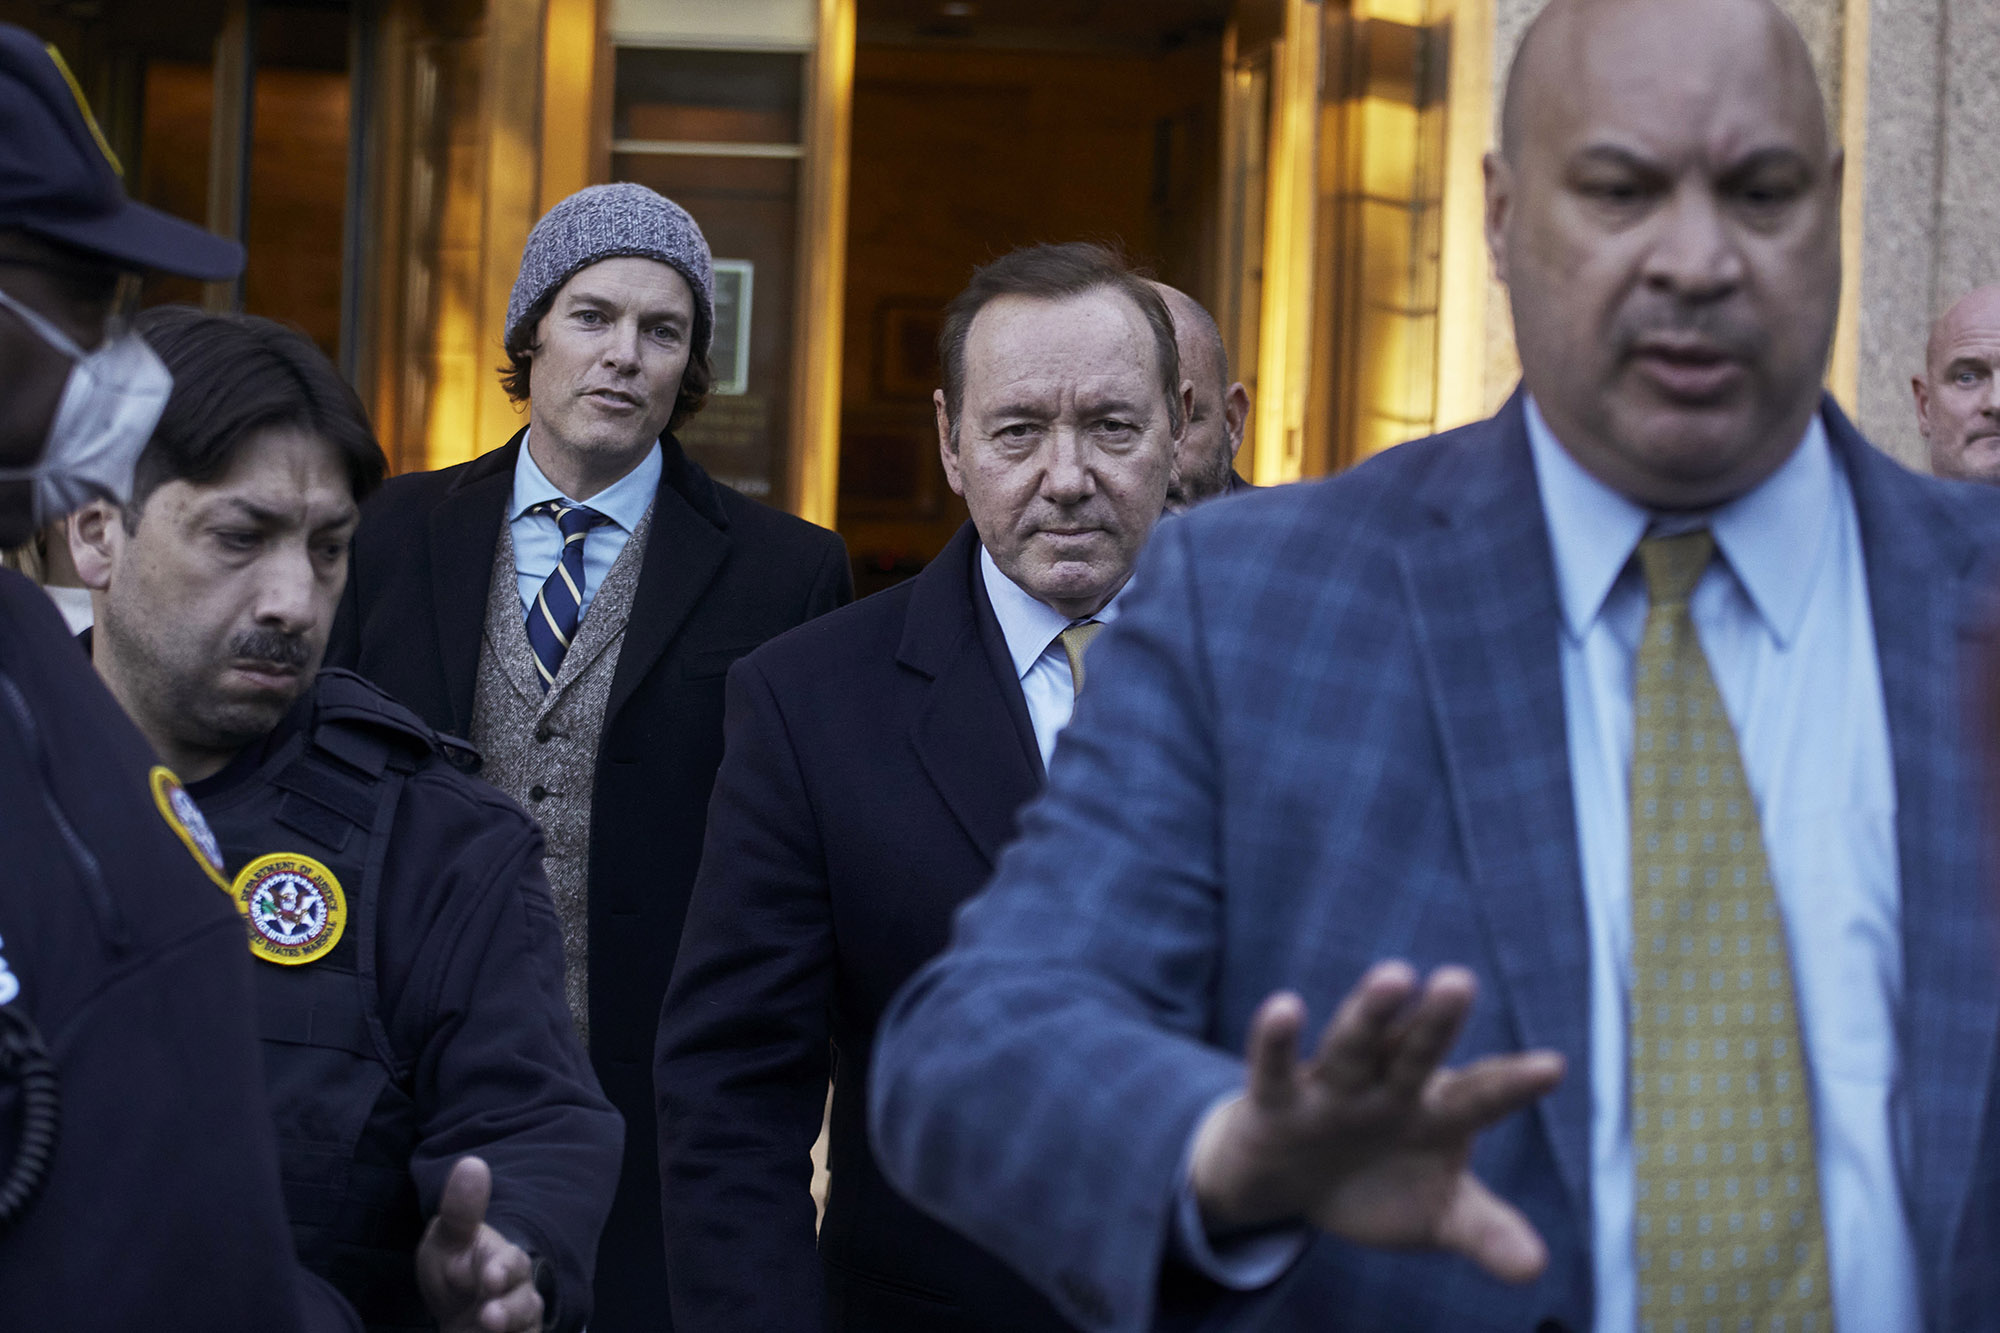 PHOTO: Kevin Spacey, center, leaves the Daniel Patrick Moynihan Court House in New York, Oct. 20, 2022.